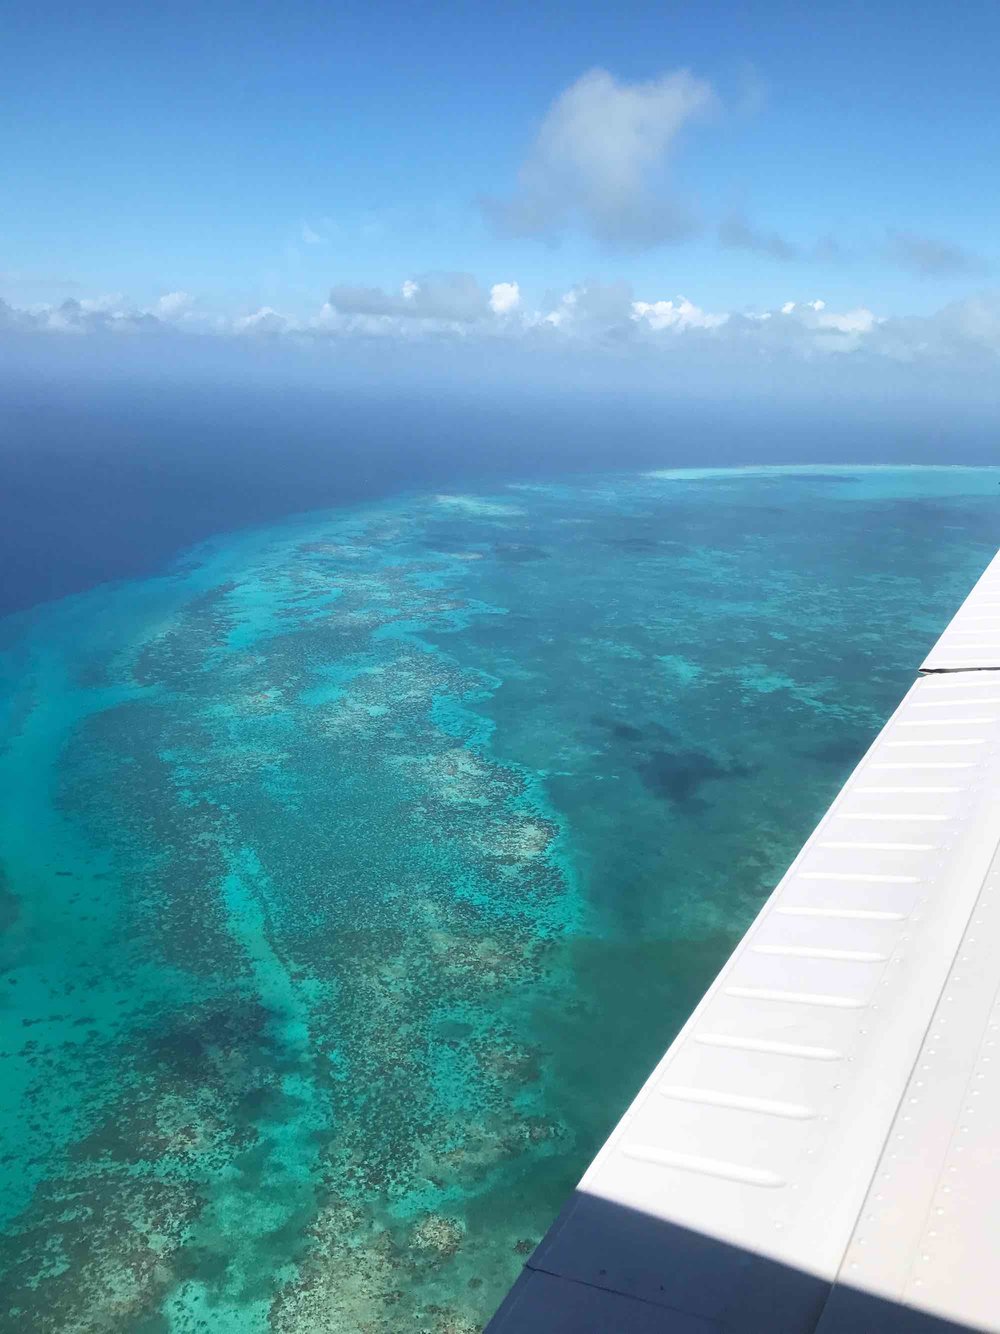 Flying over Belize to the Great Blue Hole